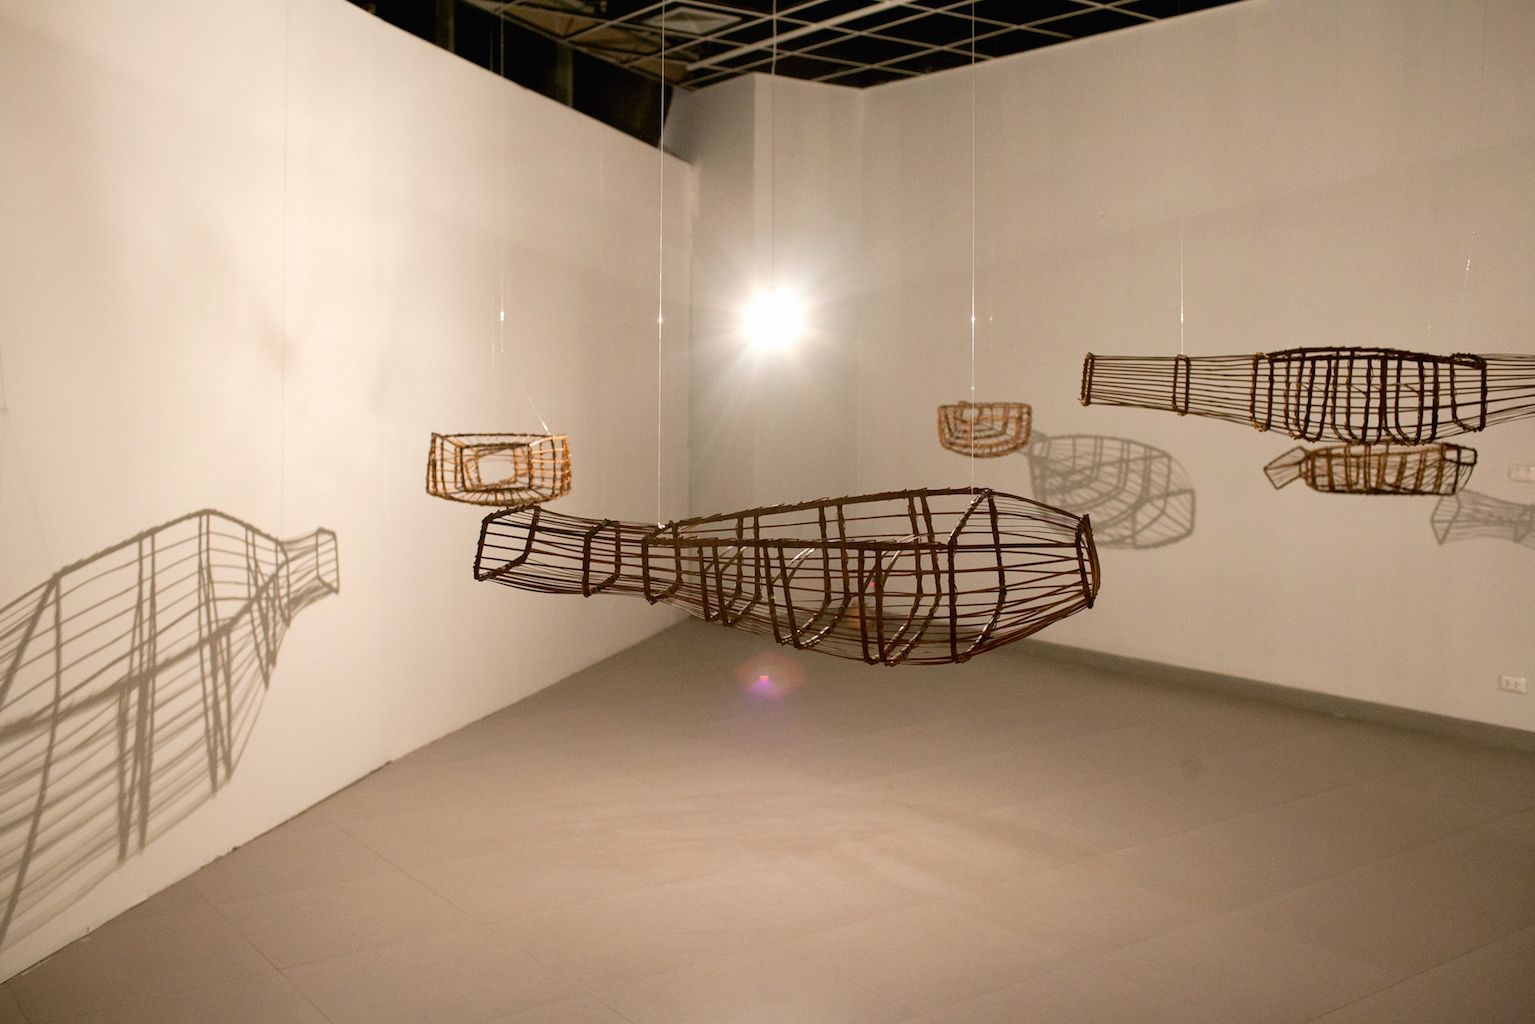 Chi River_bamboo and steel wire_112x39.4x16cm, 135x25x13cm, 105x46.3x18cm, 99x40x18cm and 100x25x19cm_2012